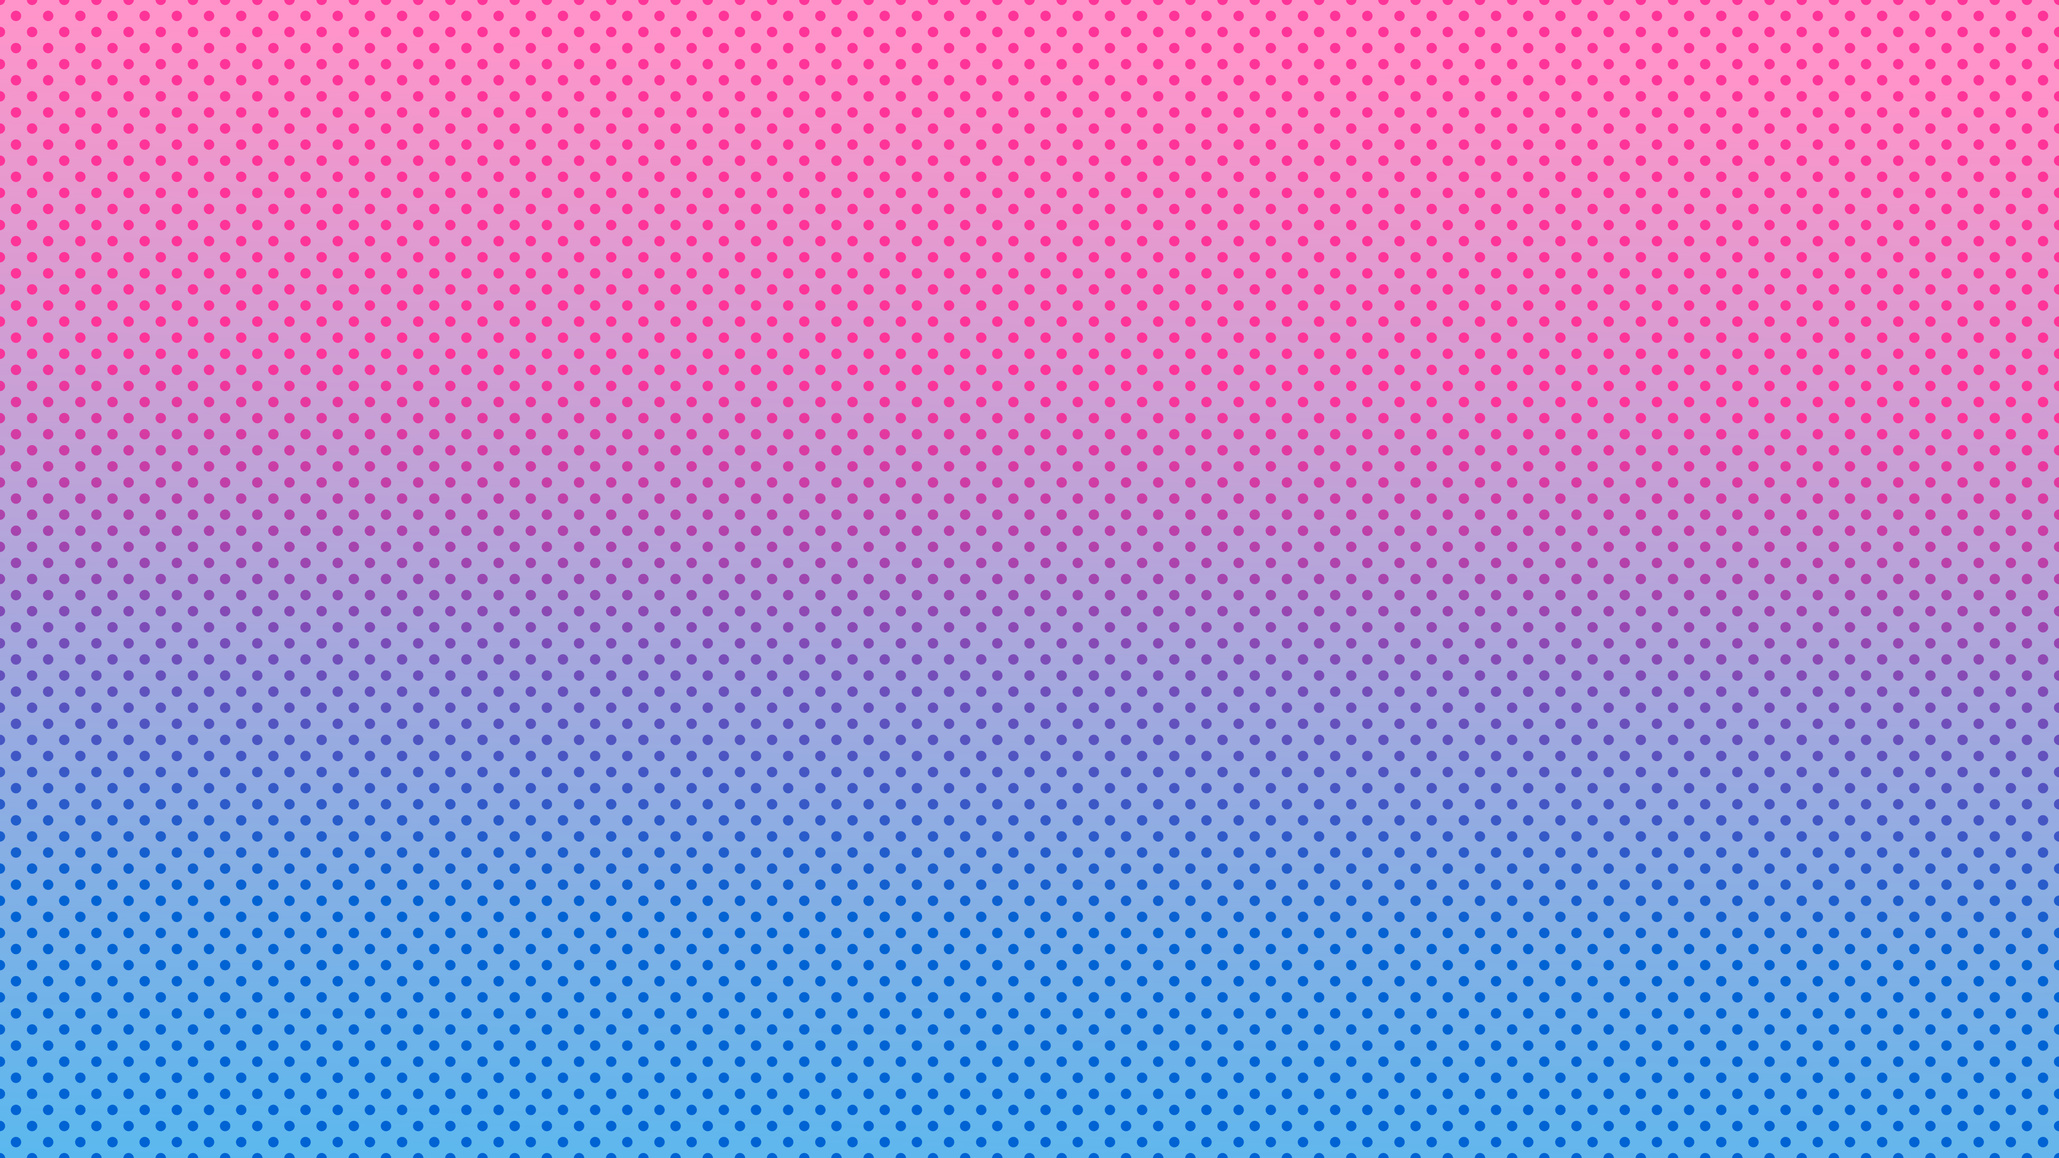 Polka Dots Abstract Pattern Comic Pop-Art Background
